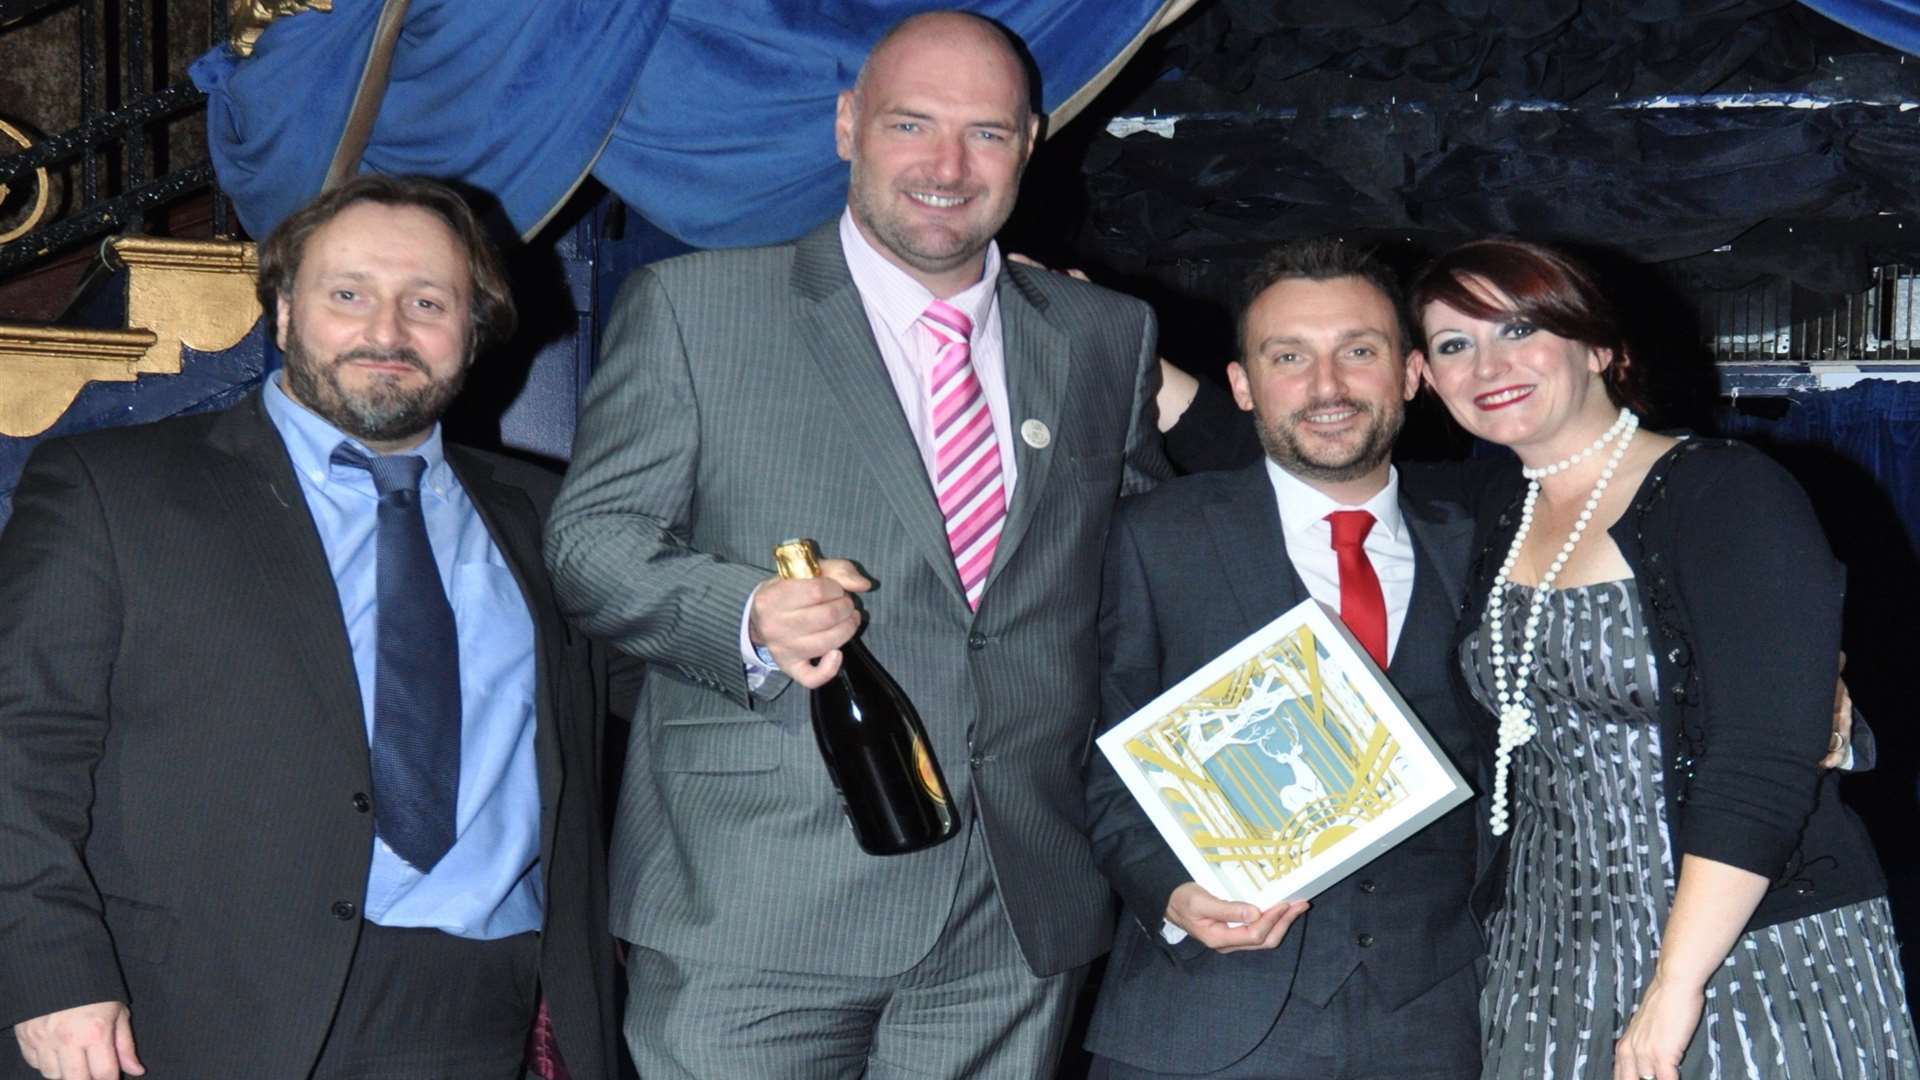 Picking up the award, from left, Earth Island Publishing managing director David Gamage, Bridge Media managing director Phil Mayne, Bridge Media group operations director Nik Hersey-Walker and Louise Gamage of Earth Island Publishing